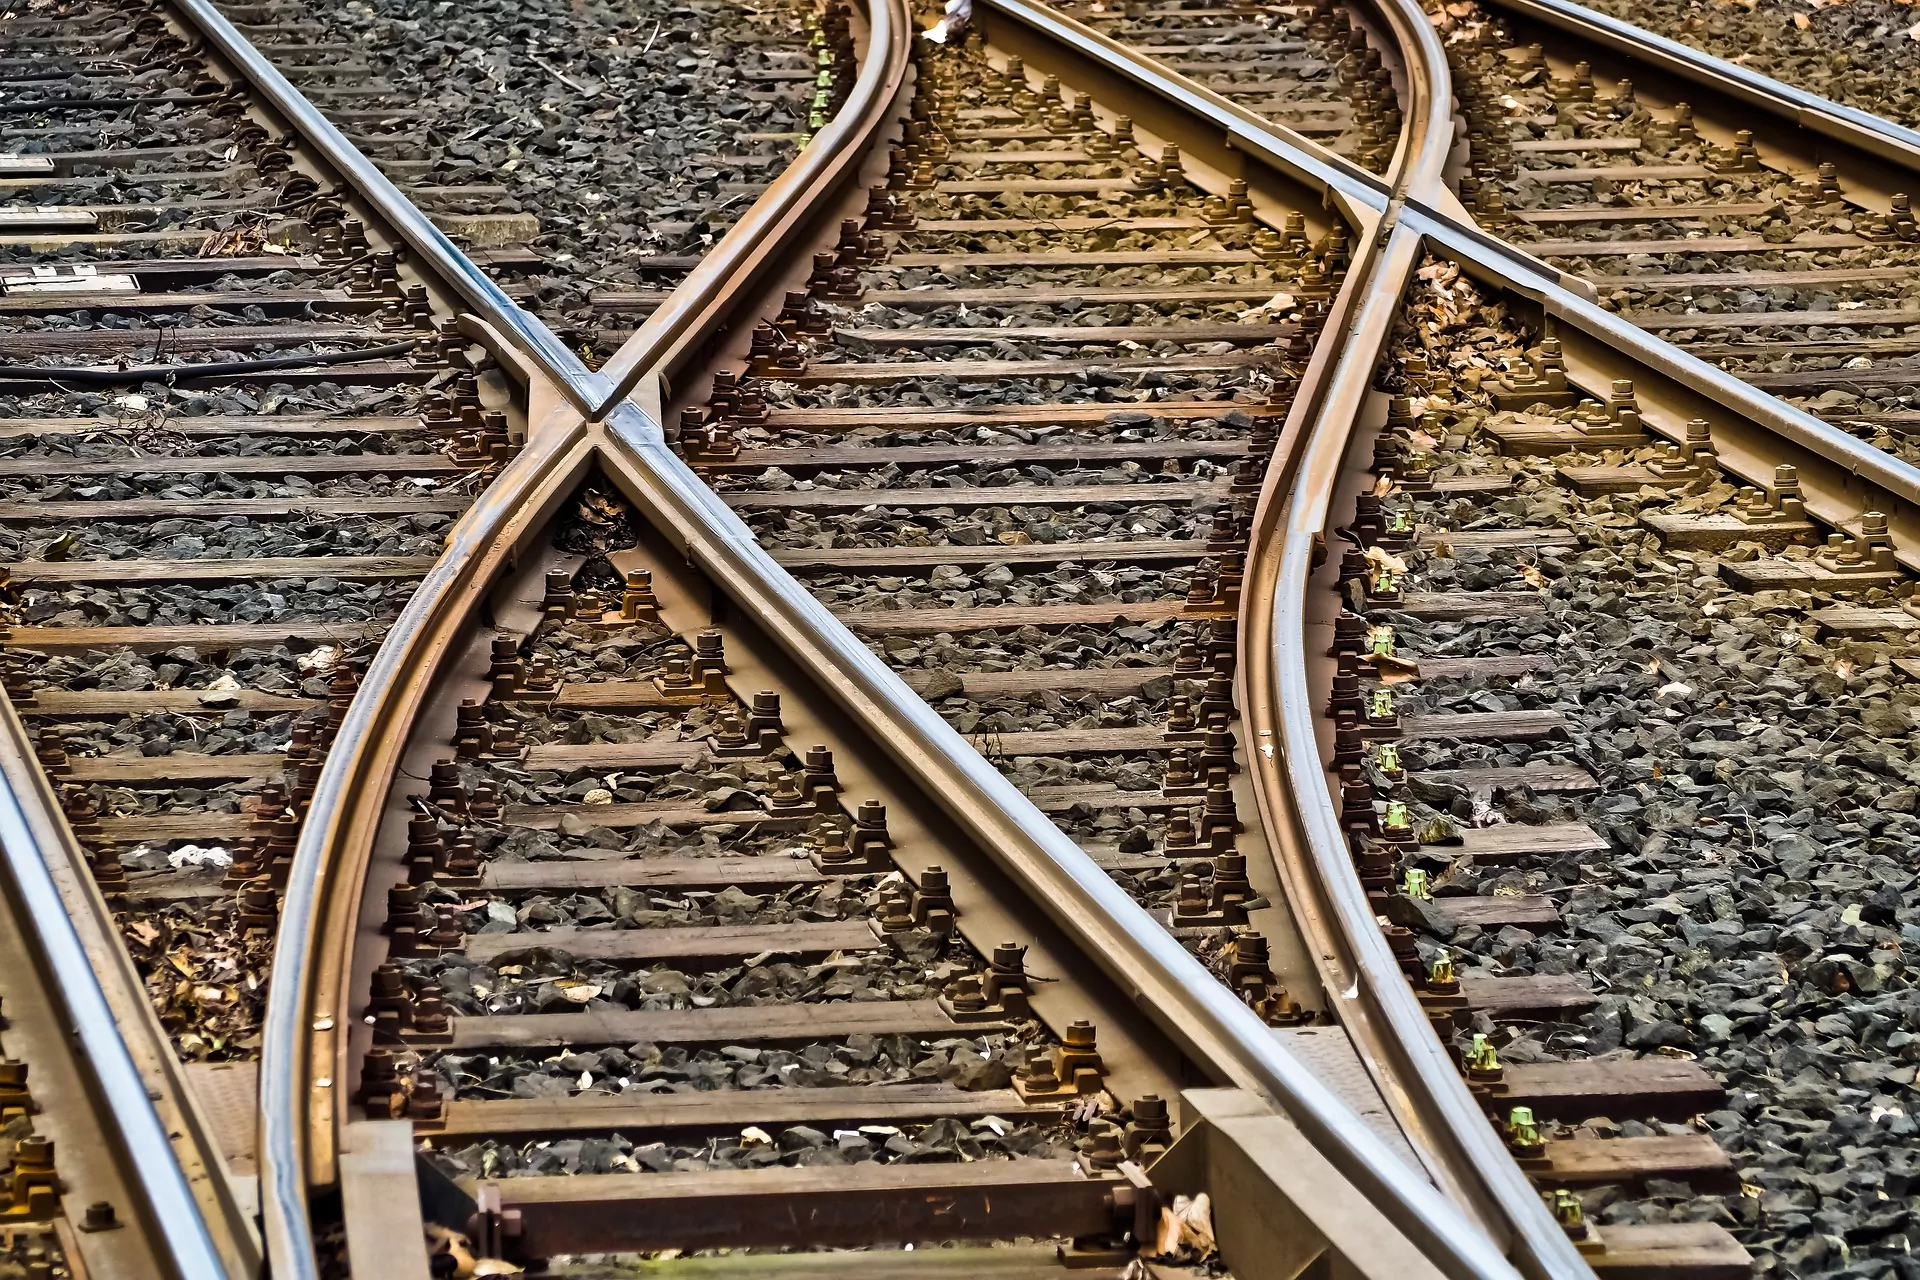 Image showing a close-up shot of a level junction. A range of railway tracks cross providing new track connections. The time-lapse of trains, railroads and stations.